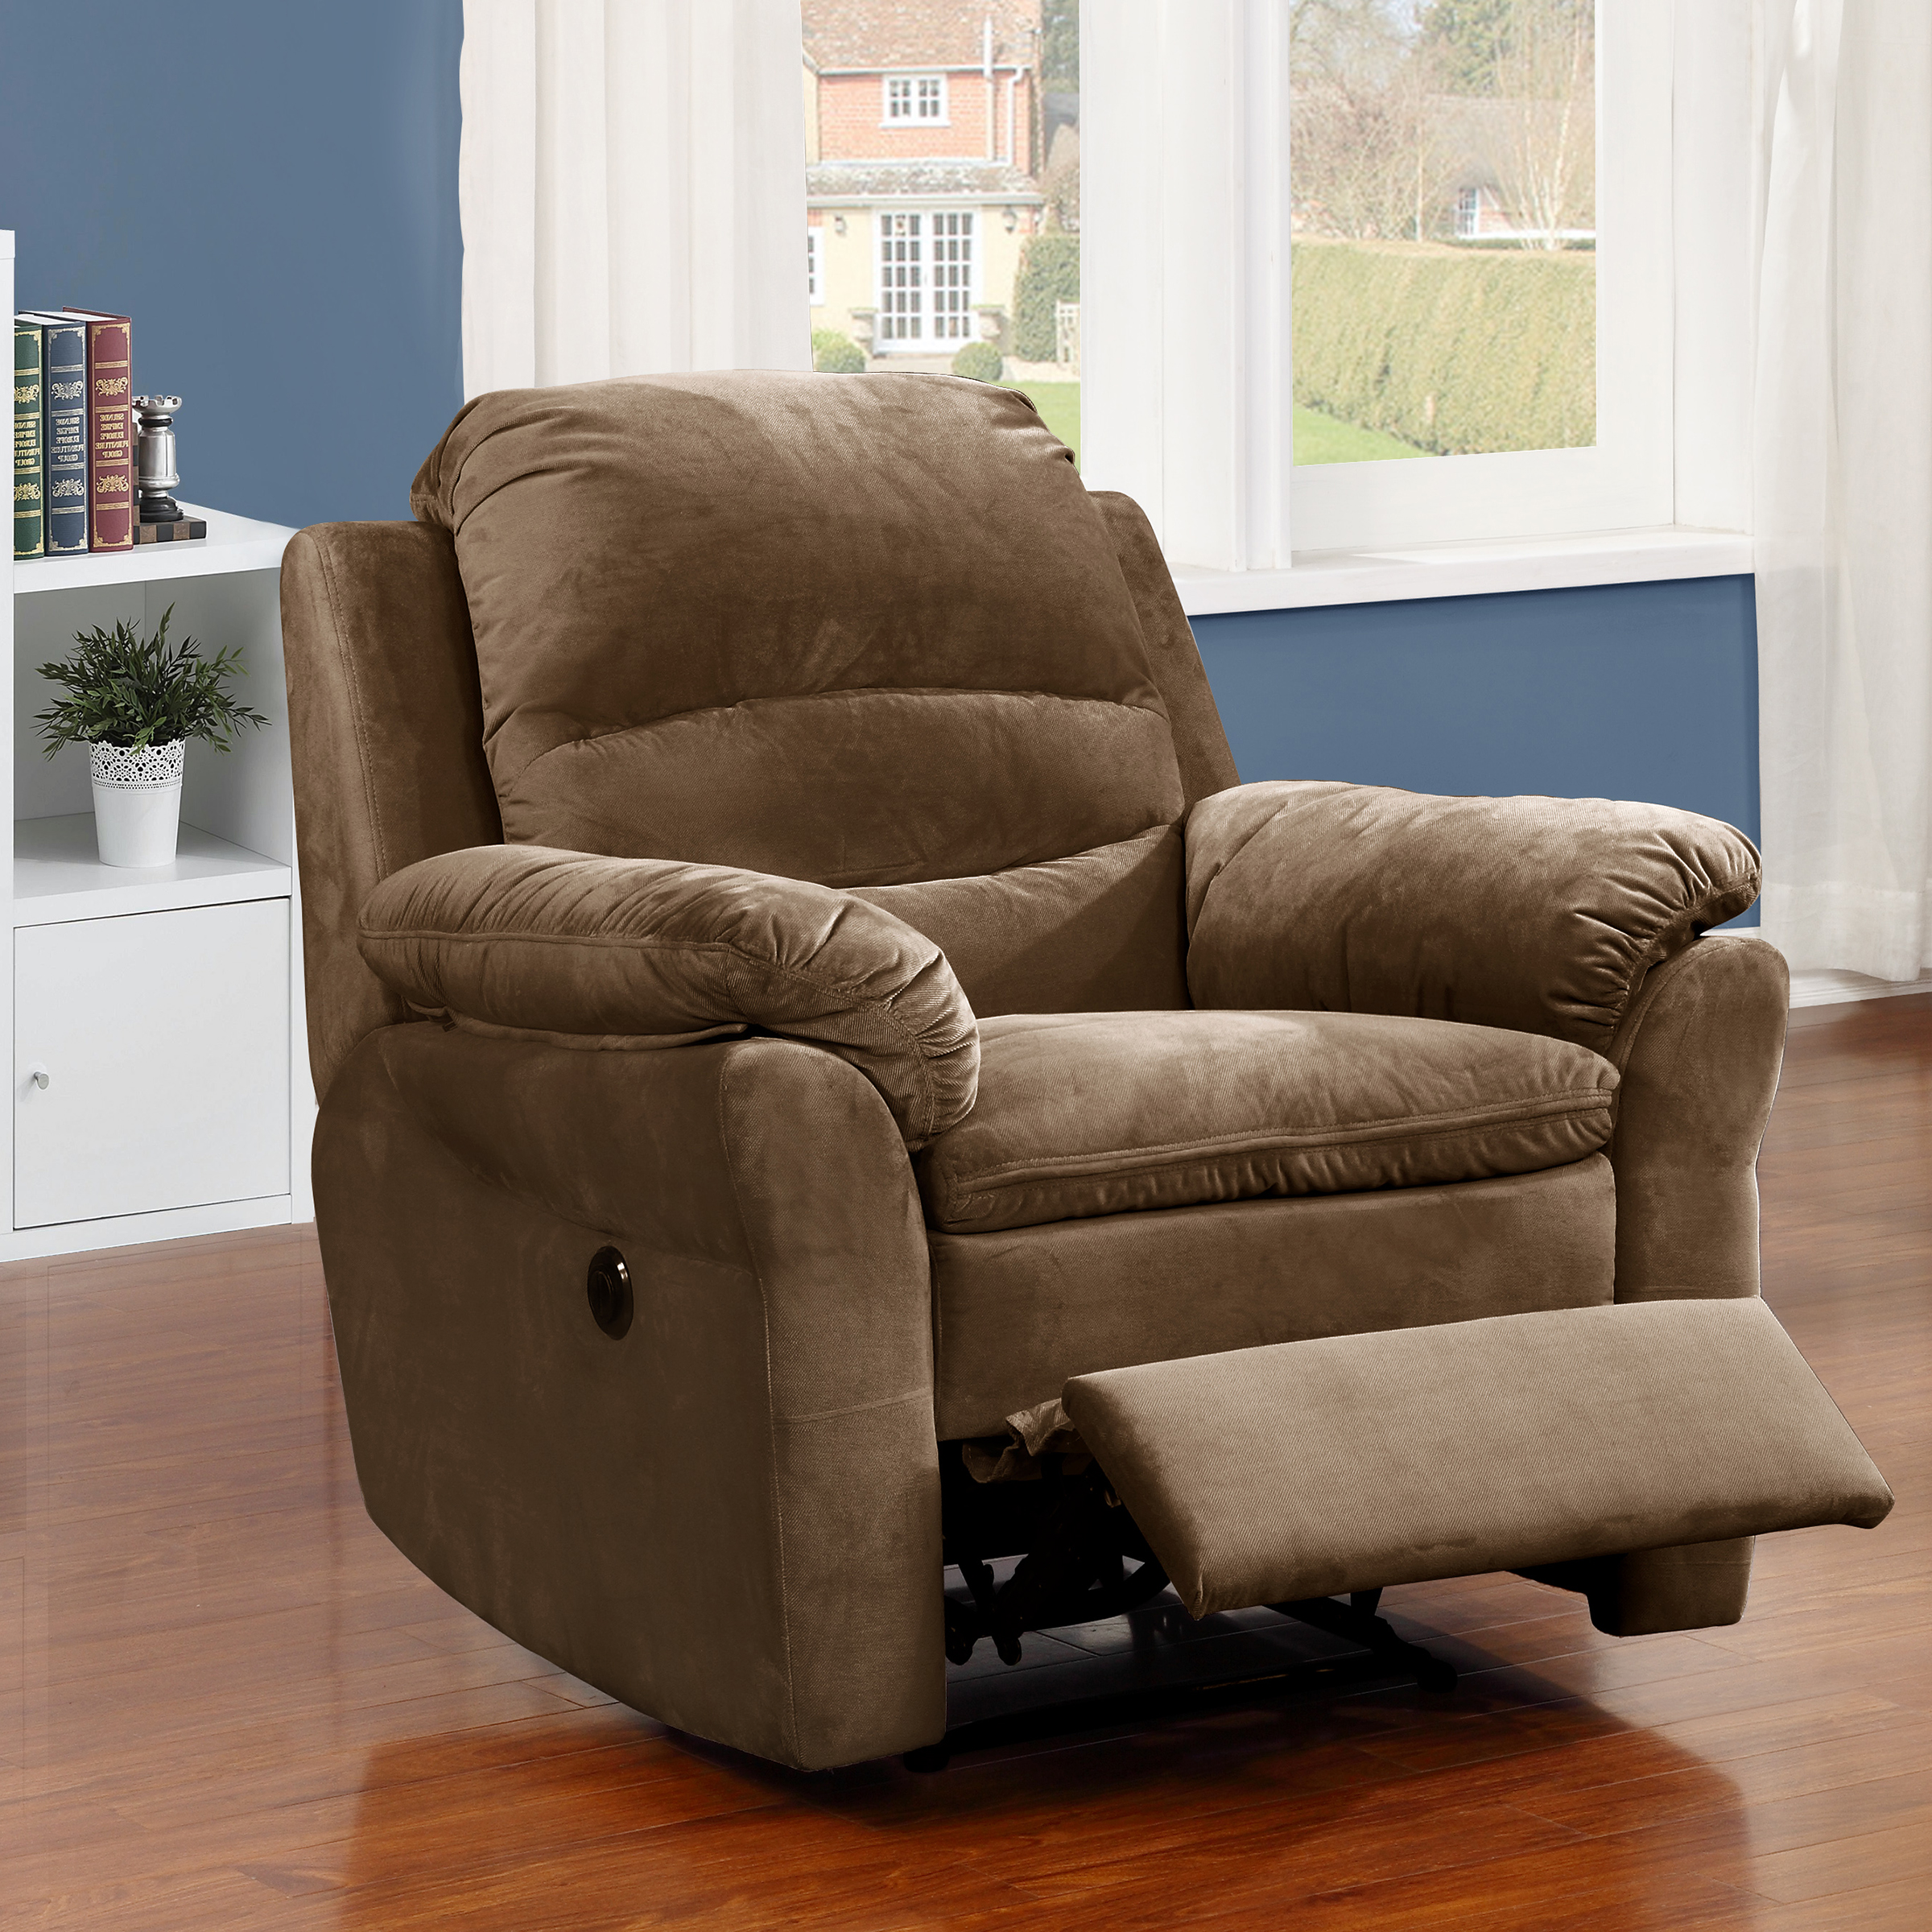 FELIX-7023 in brown open by AC Pacific product image